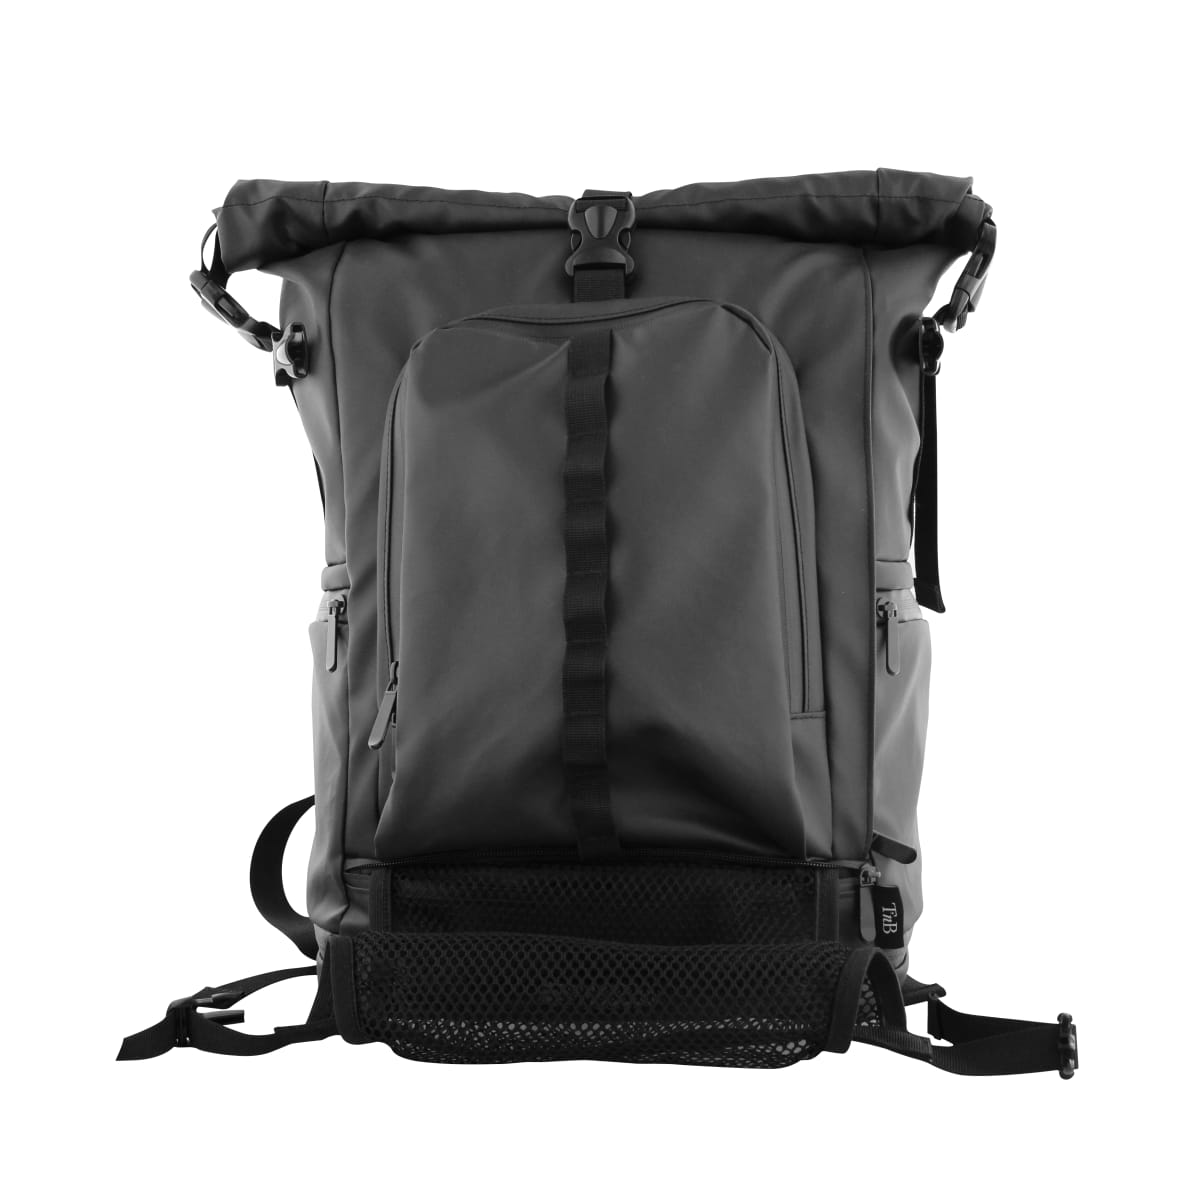 Water resistant backpack for mobility